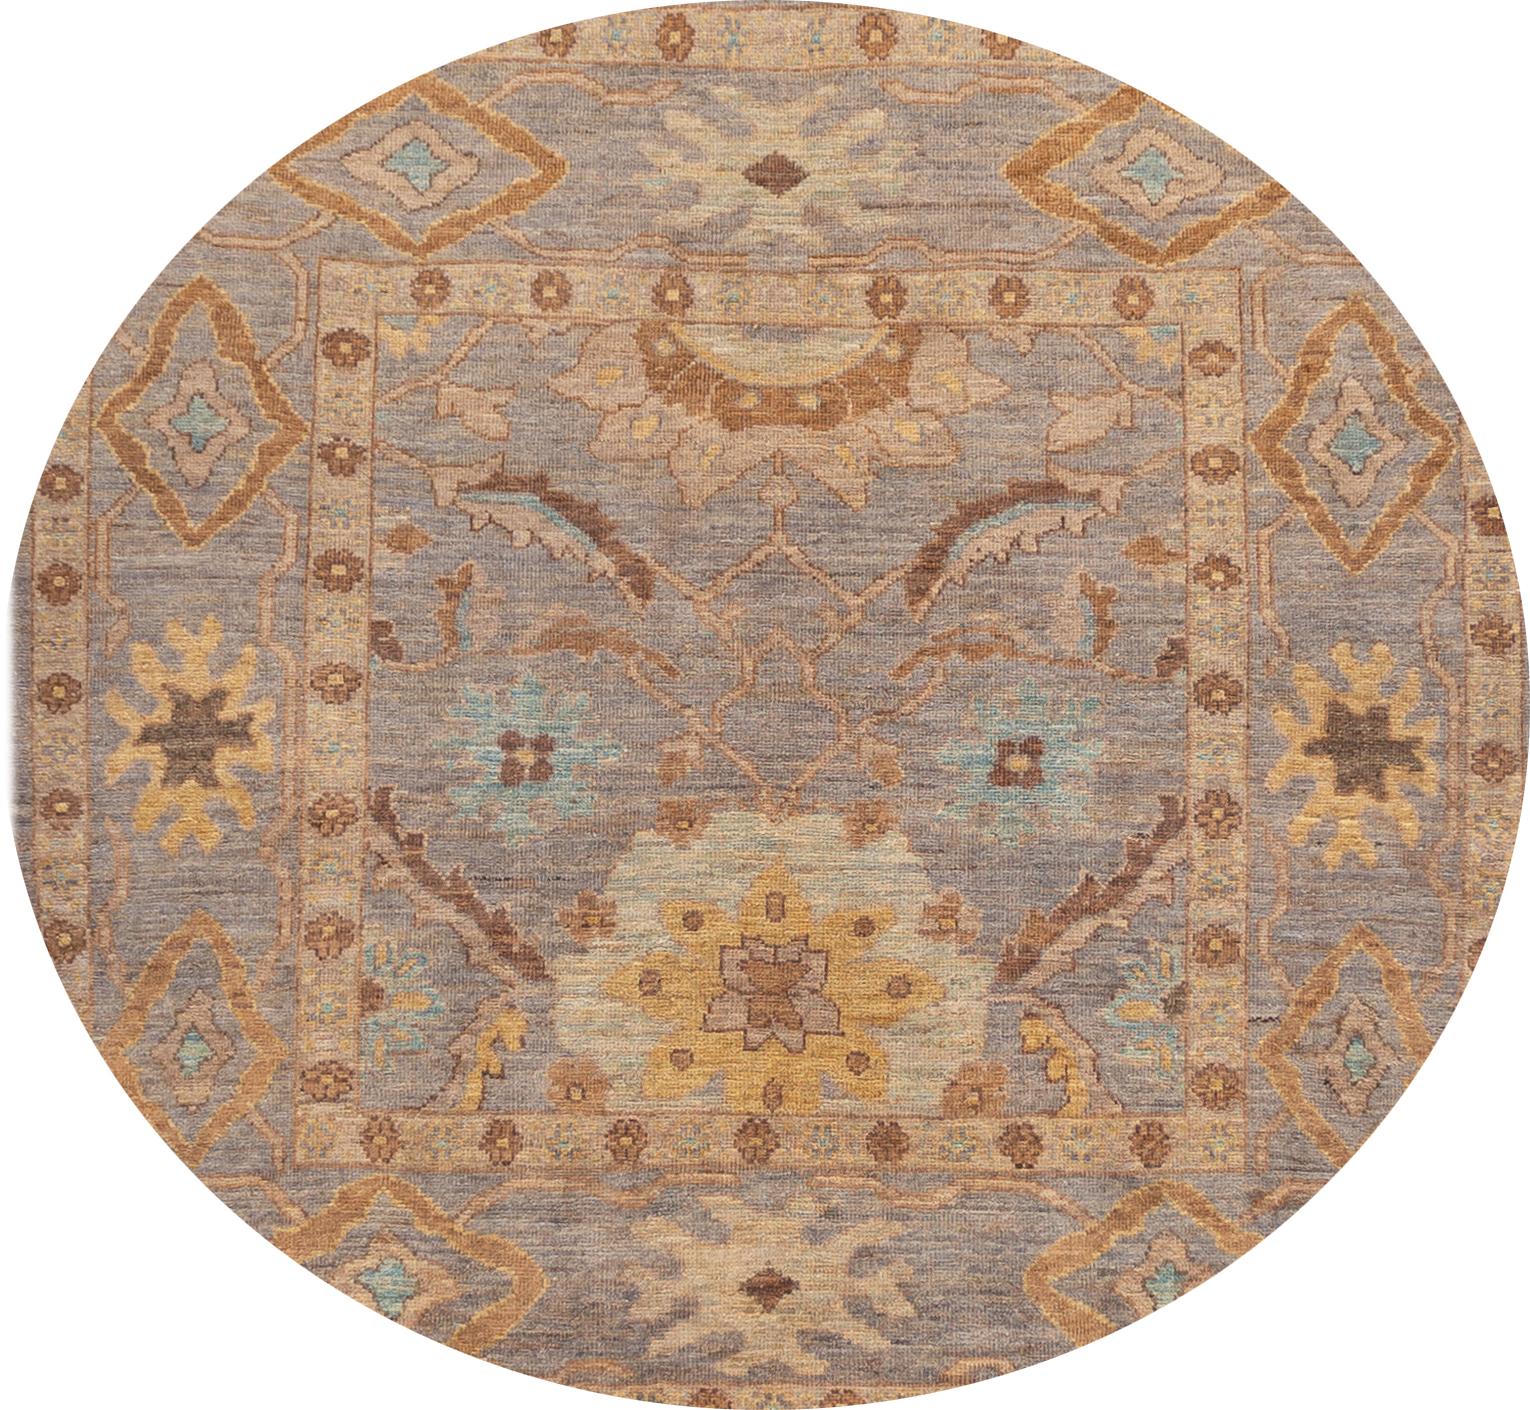 A beautiful 21st century modern Persian square Sultanabad, hand knotted rug with a brown motif and a purple field. This collection is of wool and made in Iran. 

This rug measures: 6' x 6'3